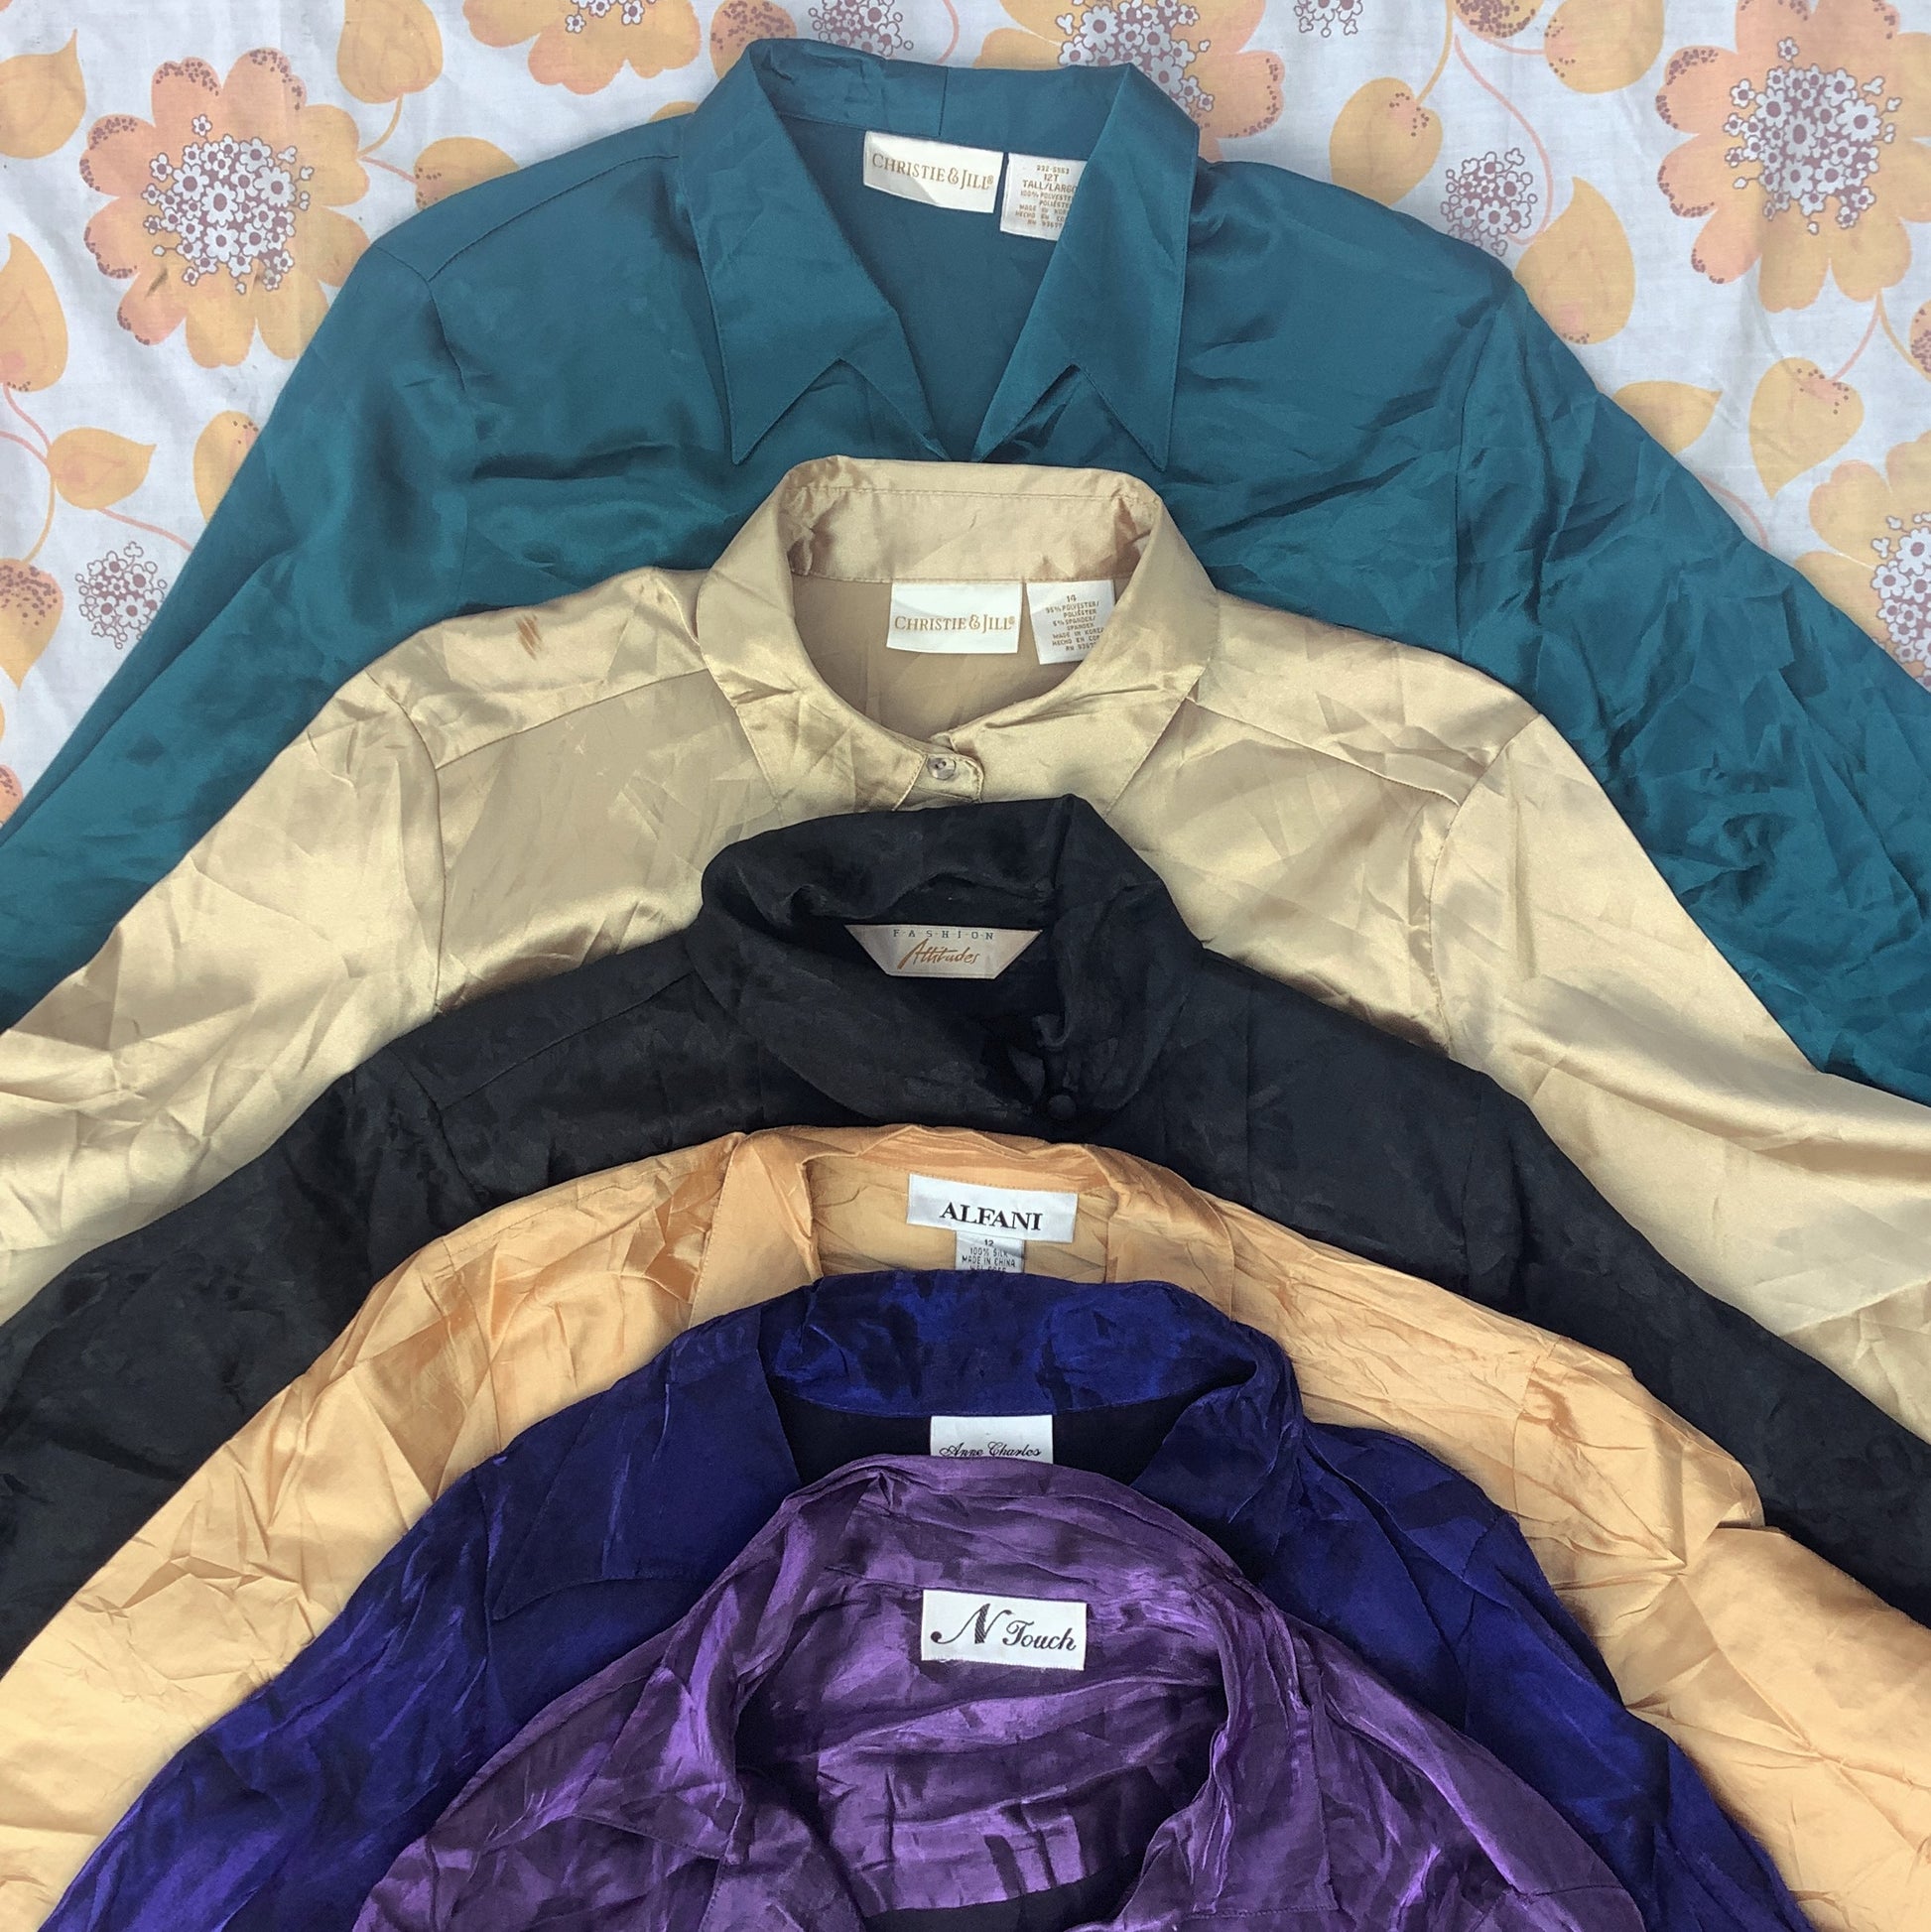 Wholesale vintage and secondhand mixed bundles of long sleeve blouses. Choose from Grade A, B or ungraded to bulk buy per kilo, piece or bale. Handpick available in Sussex warehouse of Brighton's biggest vintage retailer or shop at monthly kilo sale events.